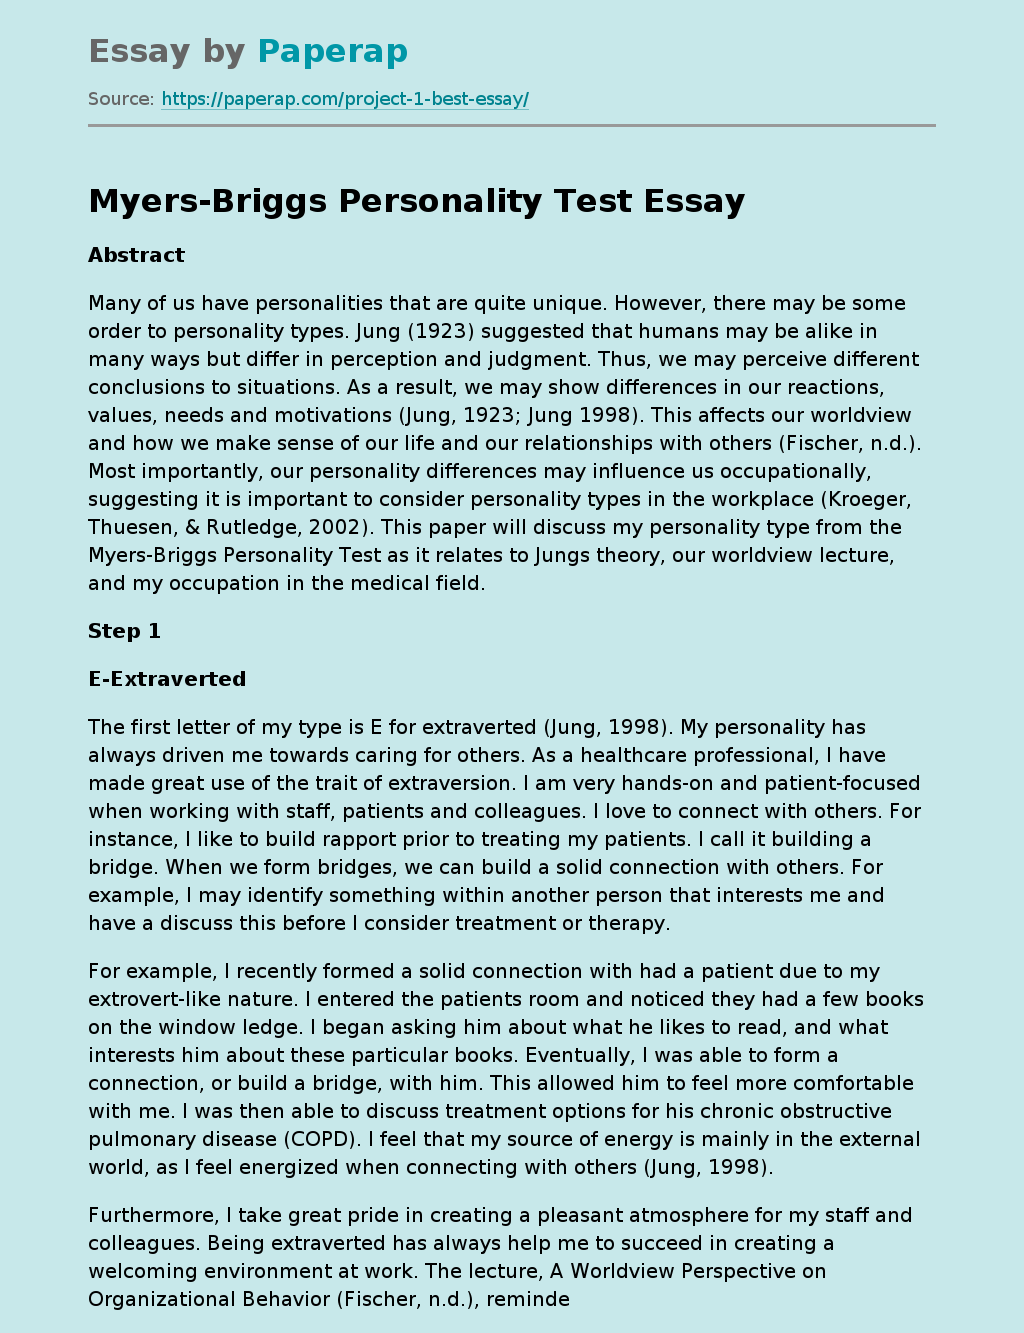 Myers-Briggs Personality Test